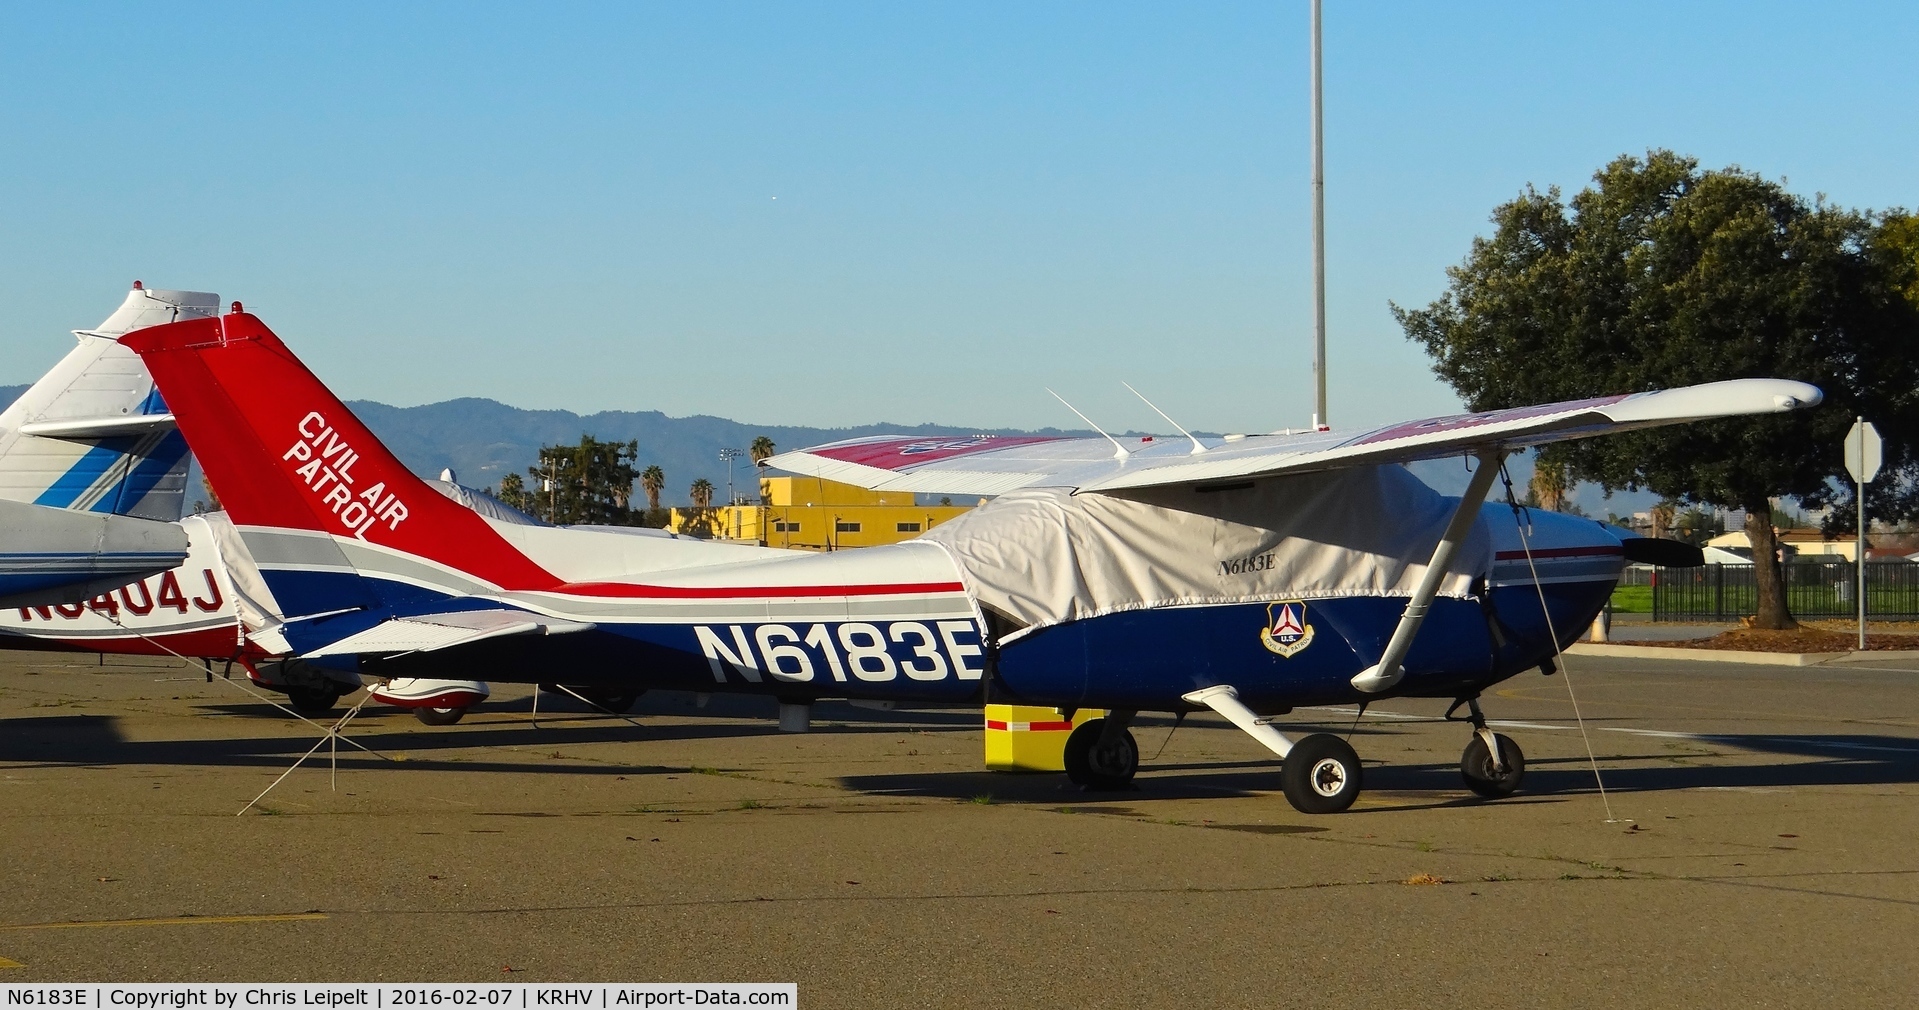 N6183E, 1983 Cessna 182R Skylane C/N 18268351, Locally-based 1983 Cessna 182R parked at its tie down in the early morning sunshine at Reid Hillview Airport, San Jose, CA.